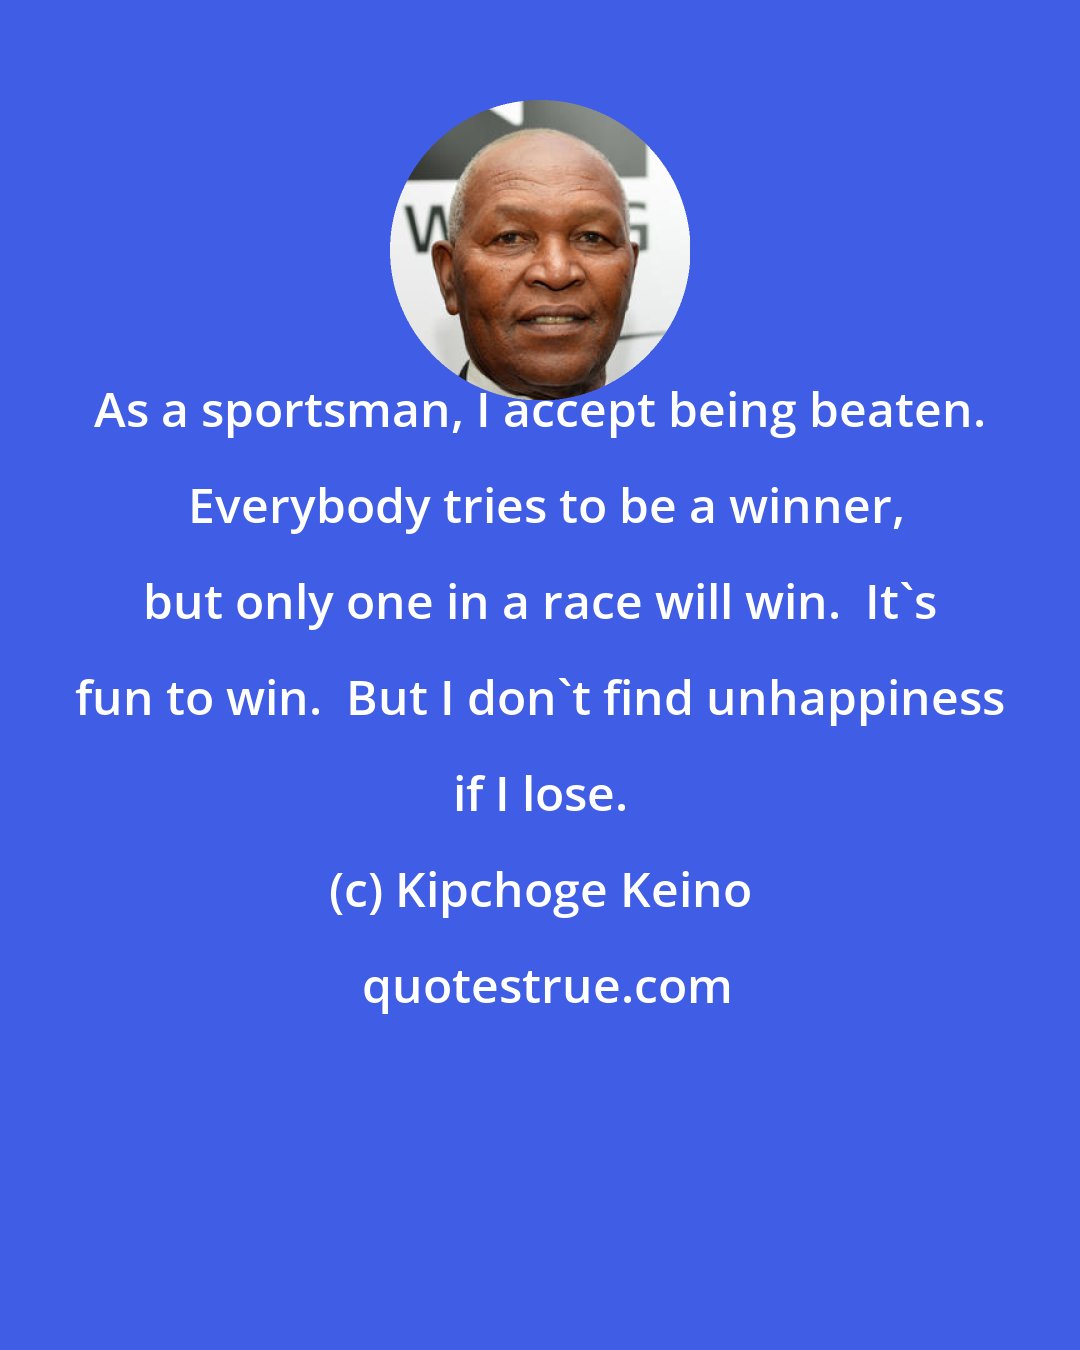 Kipchoge Keino: As a sportsman, I accept being beaten.  Everybody tries to be a winner, but only one in a race will win.  It's fun to win.  But I don't find unhappiness if I lose.